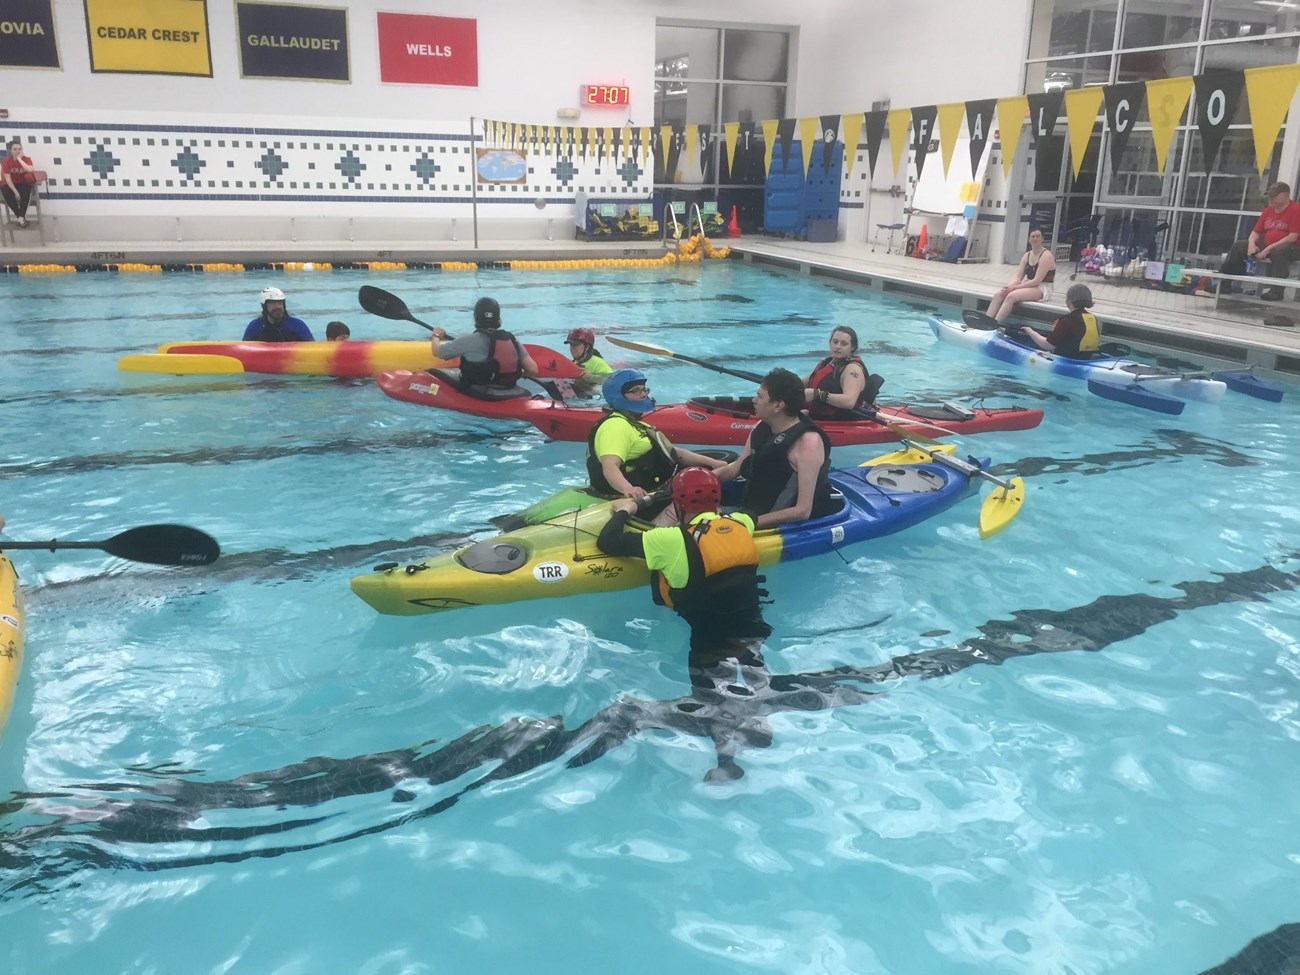 Team River Runner of the Lehigh Valley provides essential kayak training within a community pool setting. Photo Credit: TRR’s Facebook page.